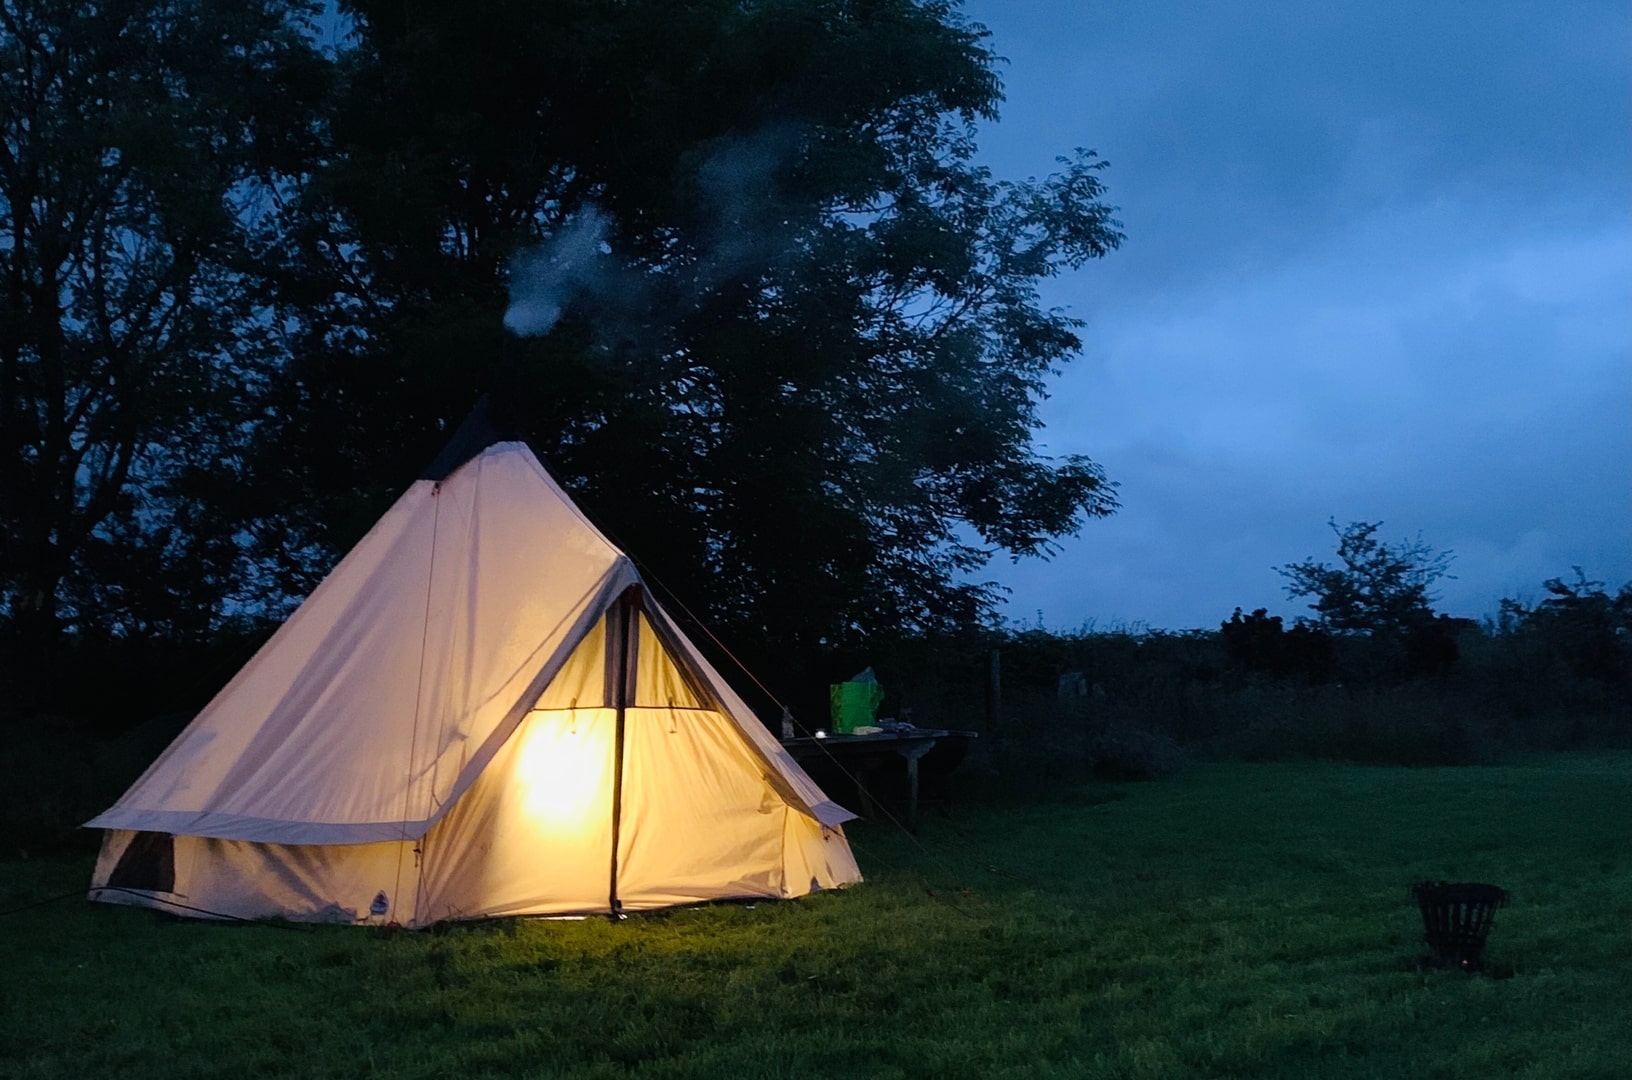 wild camping in england